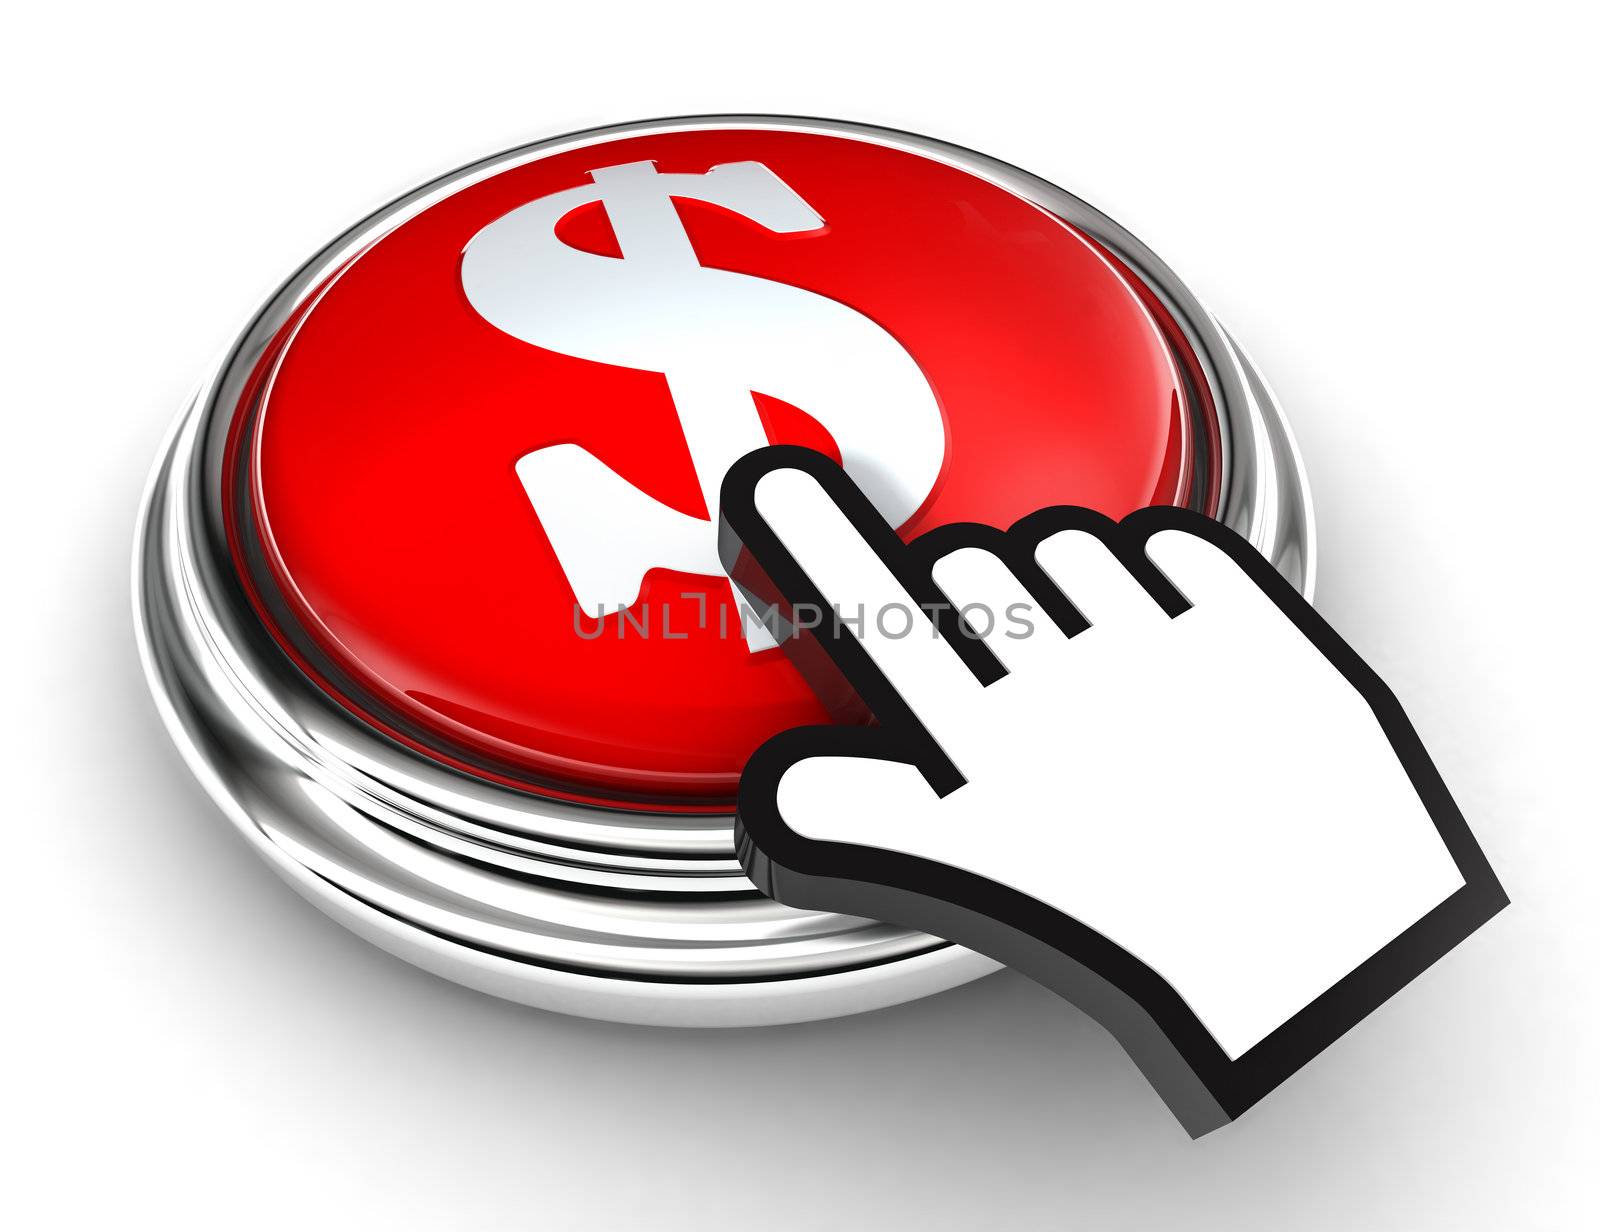 dollar symbol red button and cursor hand on white background. clipping paths included